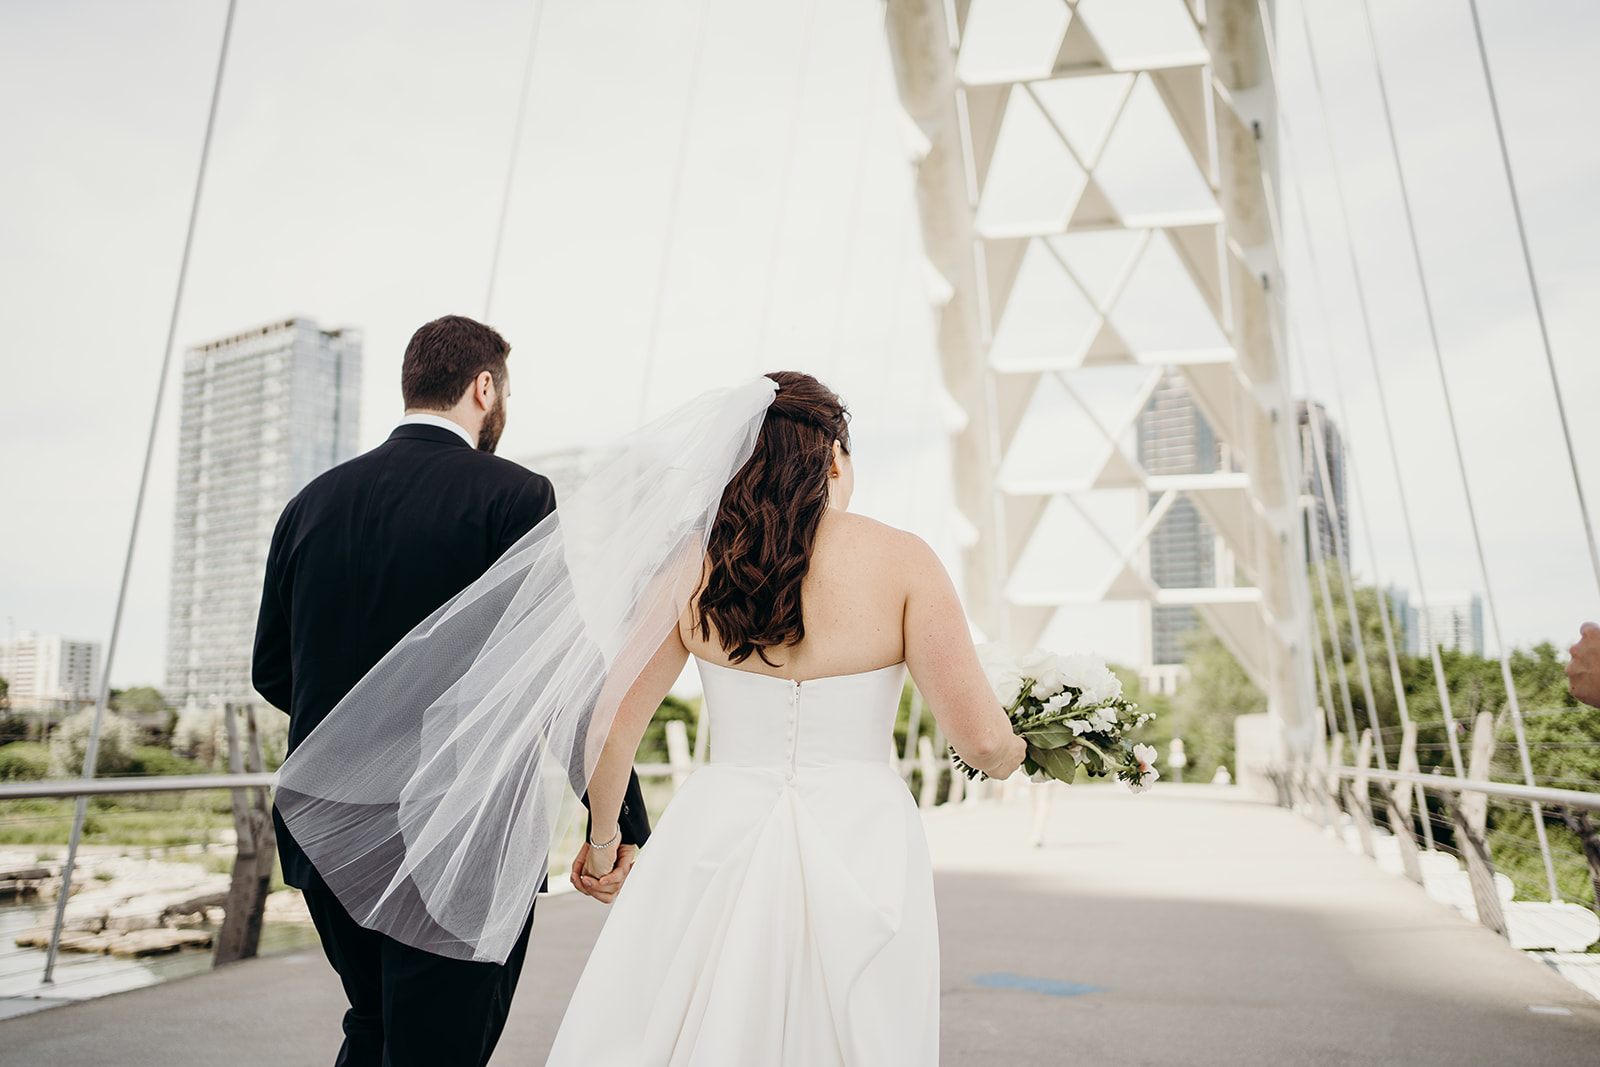 Married couple walks down the bridge together holding hands.